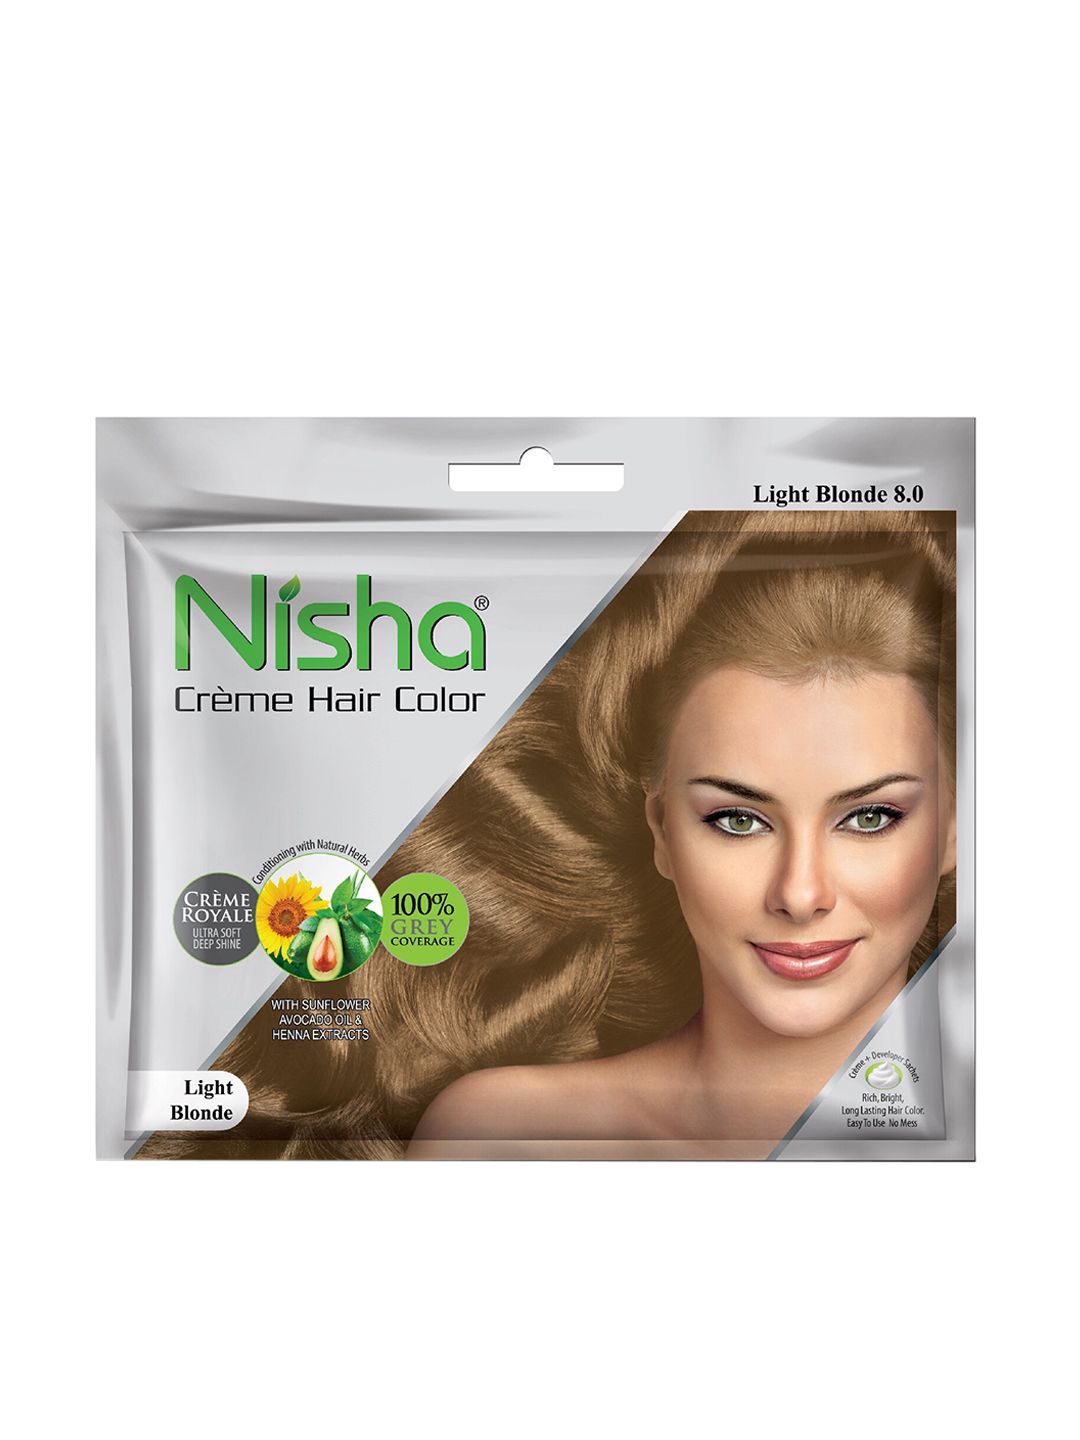 Nisha Unisex Brown Pack of 6 Creme Hair Color 50gm each- Light Blonde Price in India